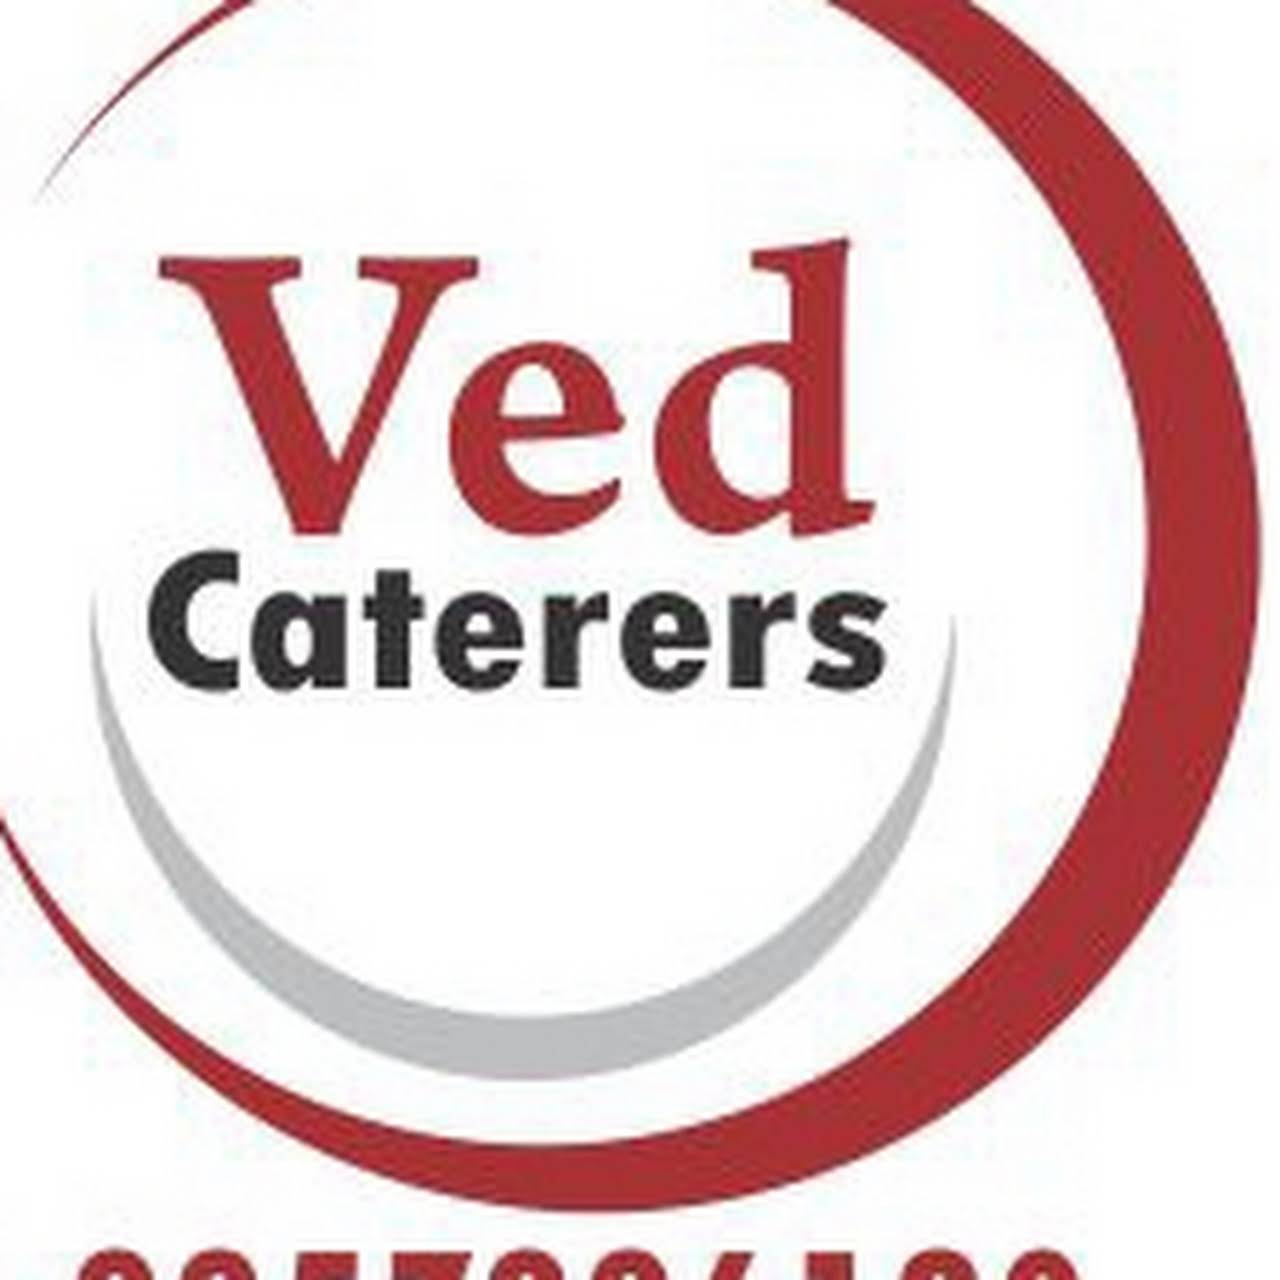 Ved Caterers - Logo